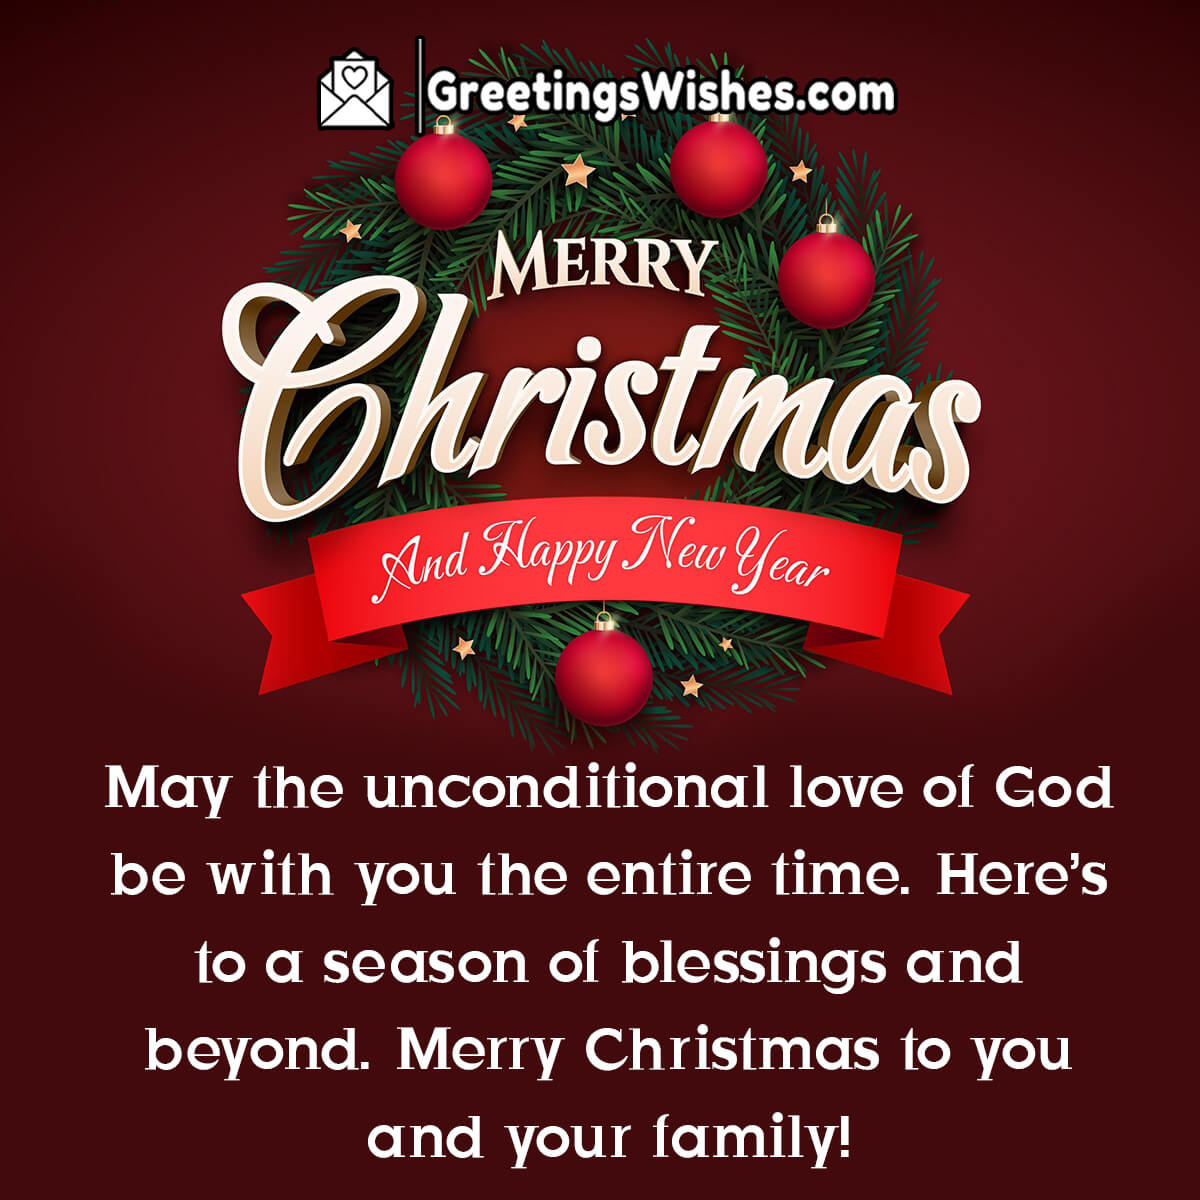 Merry Christmas Blessings Image